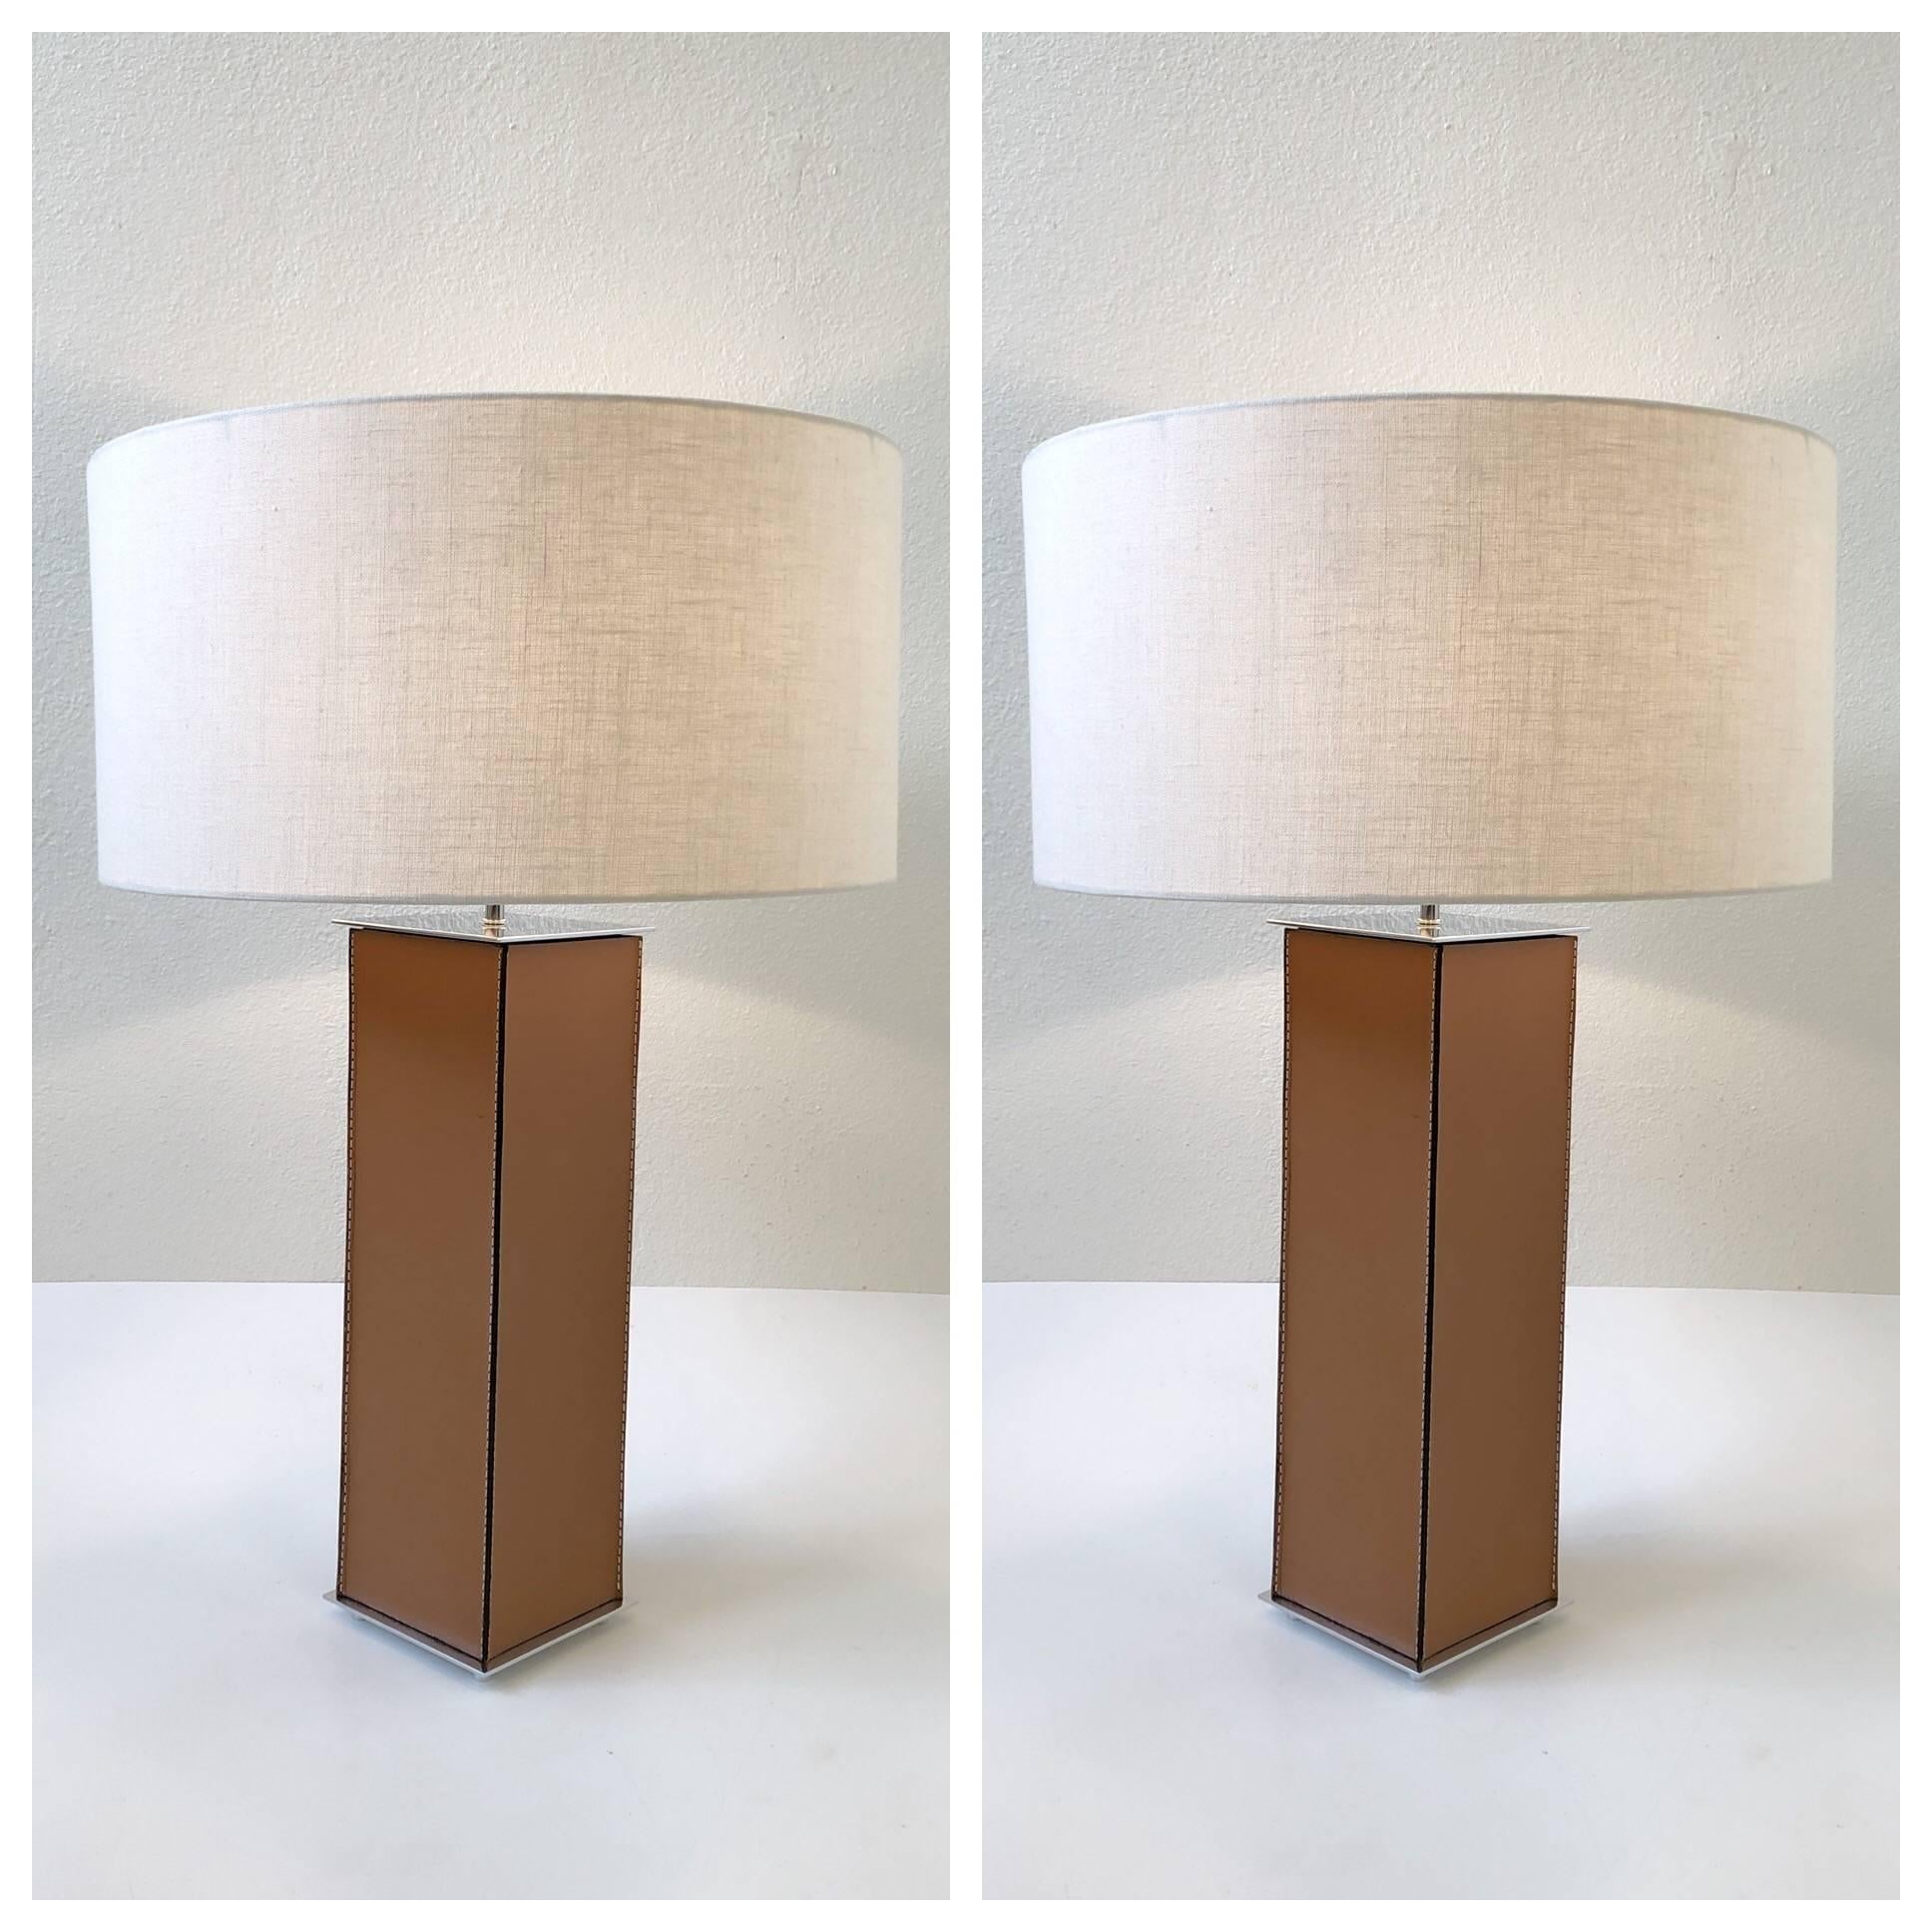 A glamorous pair of saddle stitch leather table lamps from the 1970s by Laurel Lamps.
The lamps have been newly rewired and new linen shades.

Dimensions: 30.5” high, 20” diameter.
Base is 6” by 6”.